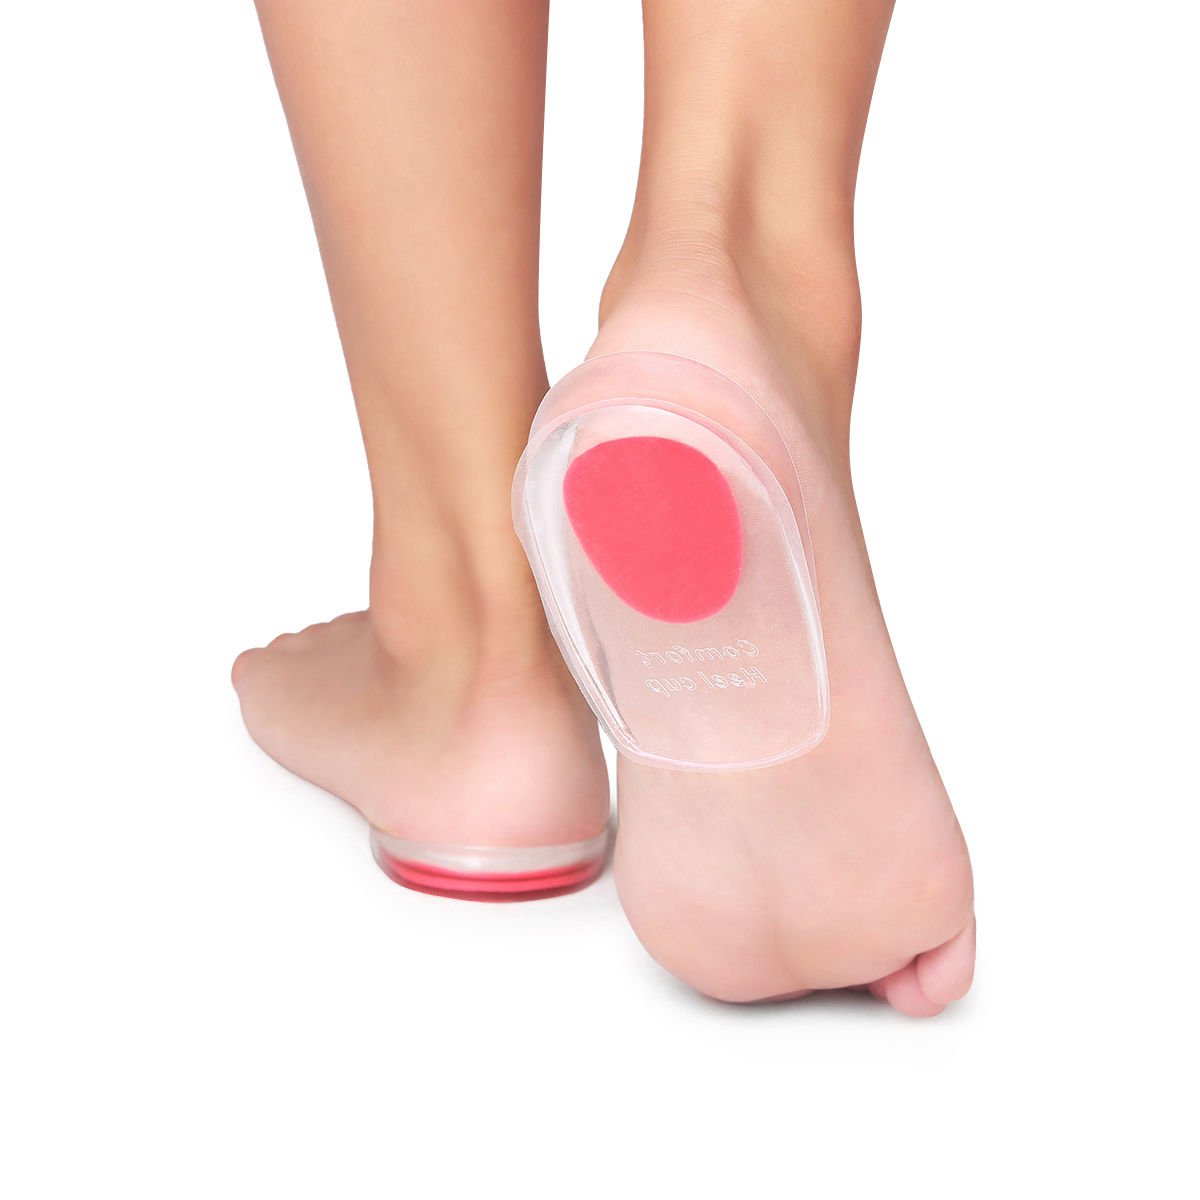 Silicone Gel Heel Comfort Cup Pad Cushion Insoles Inserts Sole Shoes UK